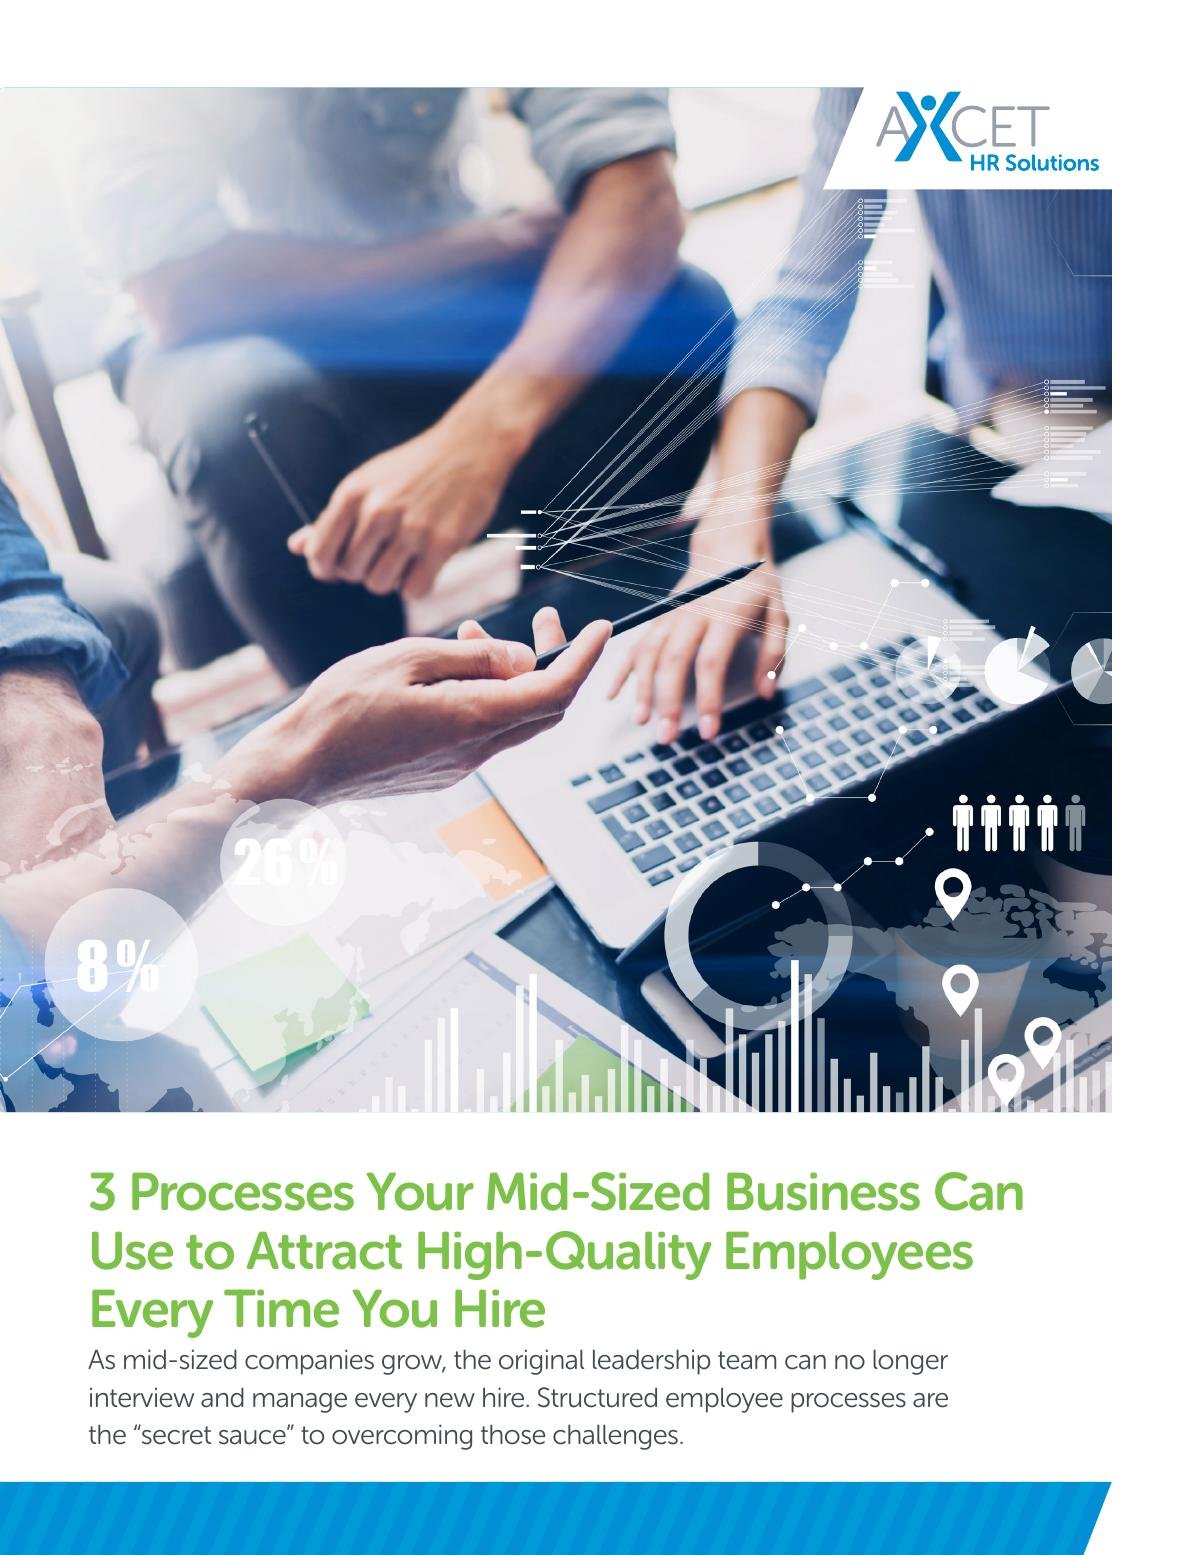 3 Processes Your Mid-Sized Business Can Use to Attract High-Quality Employees